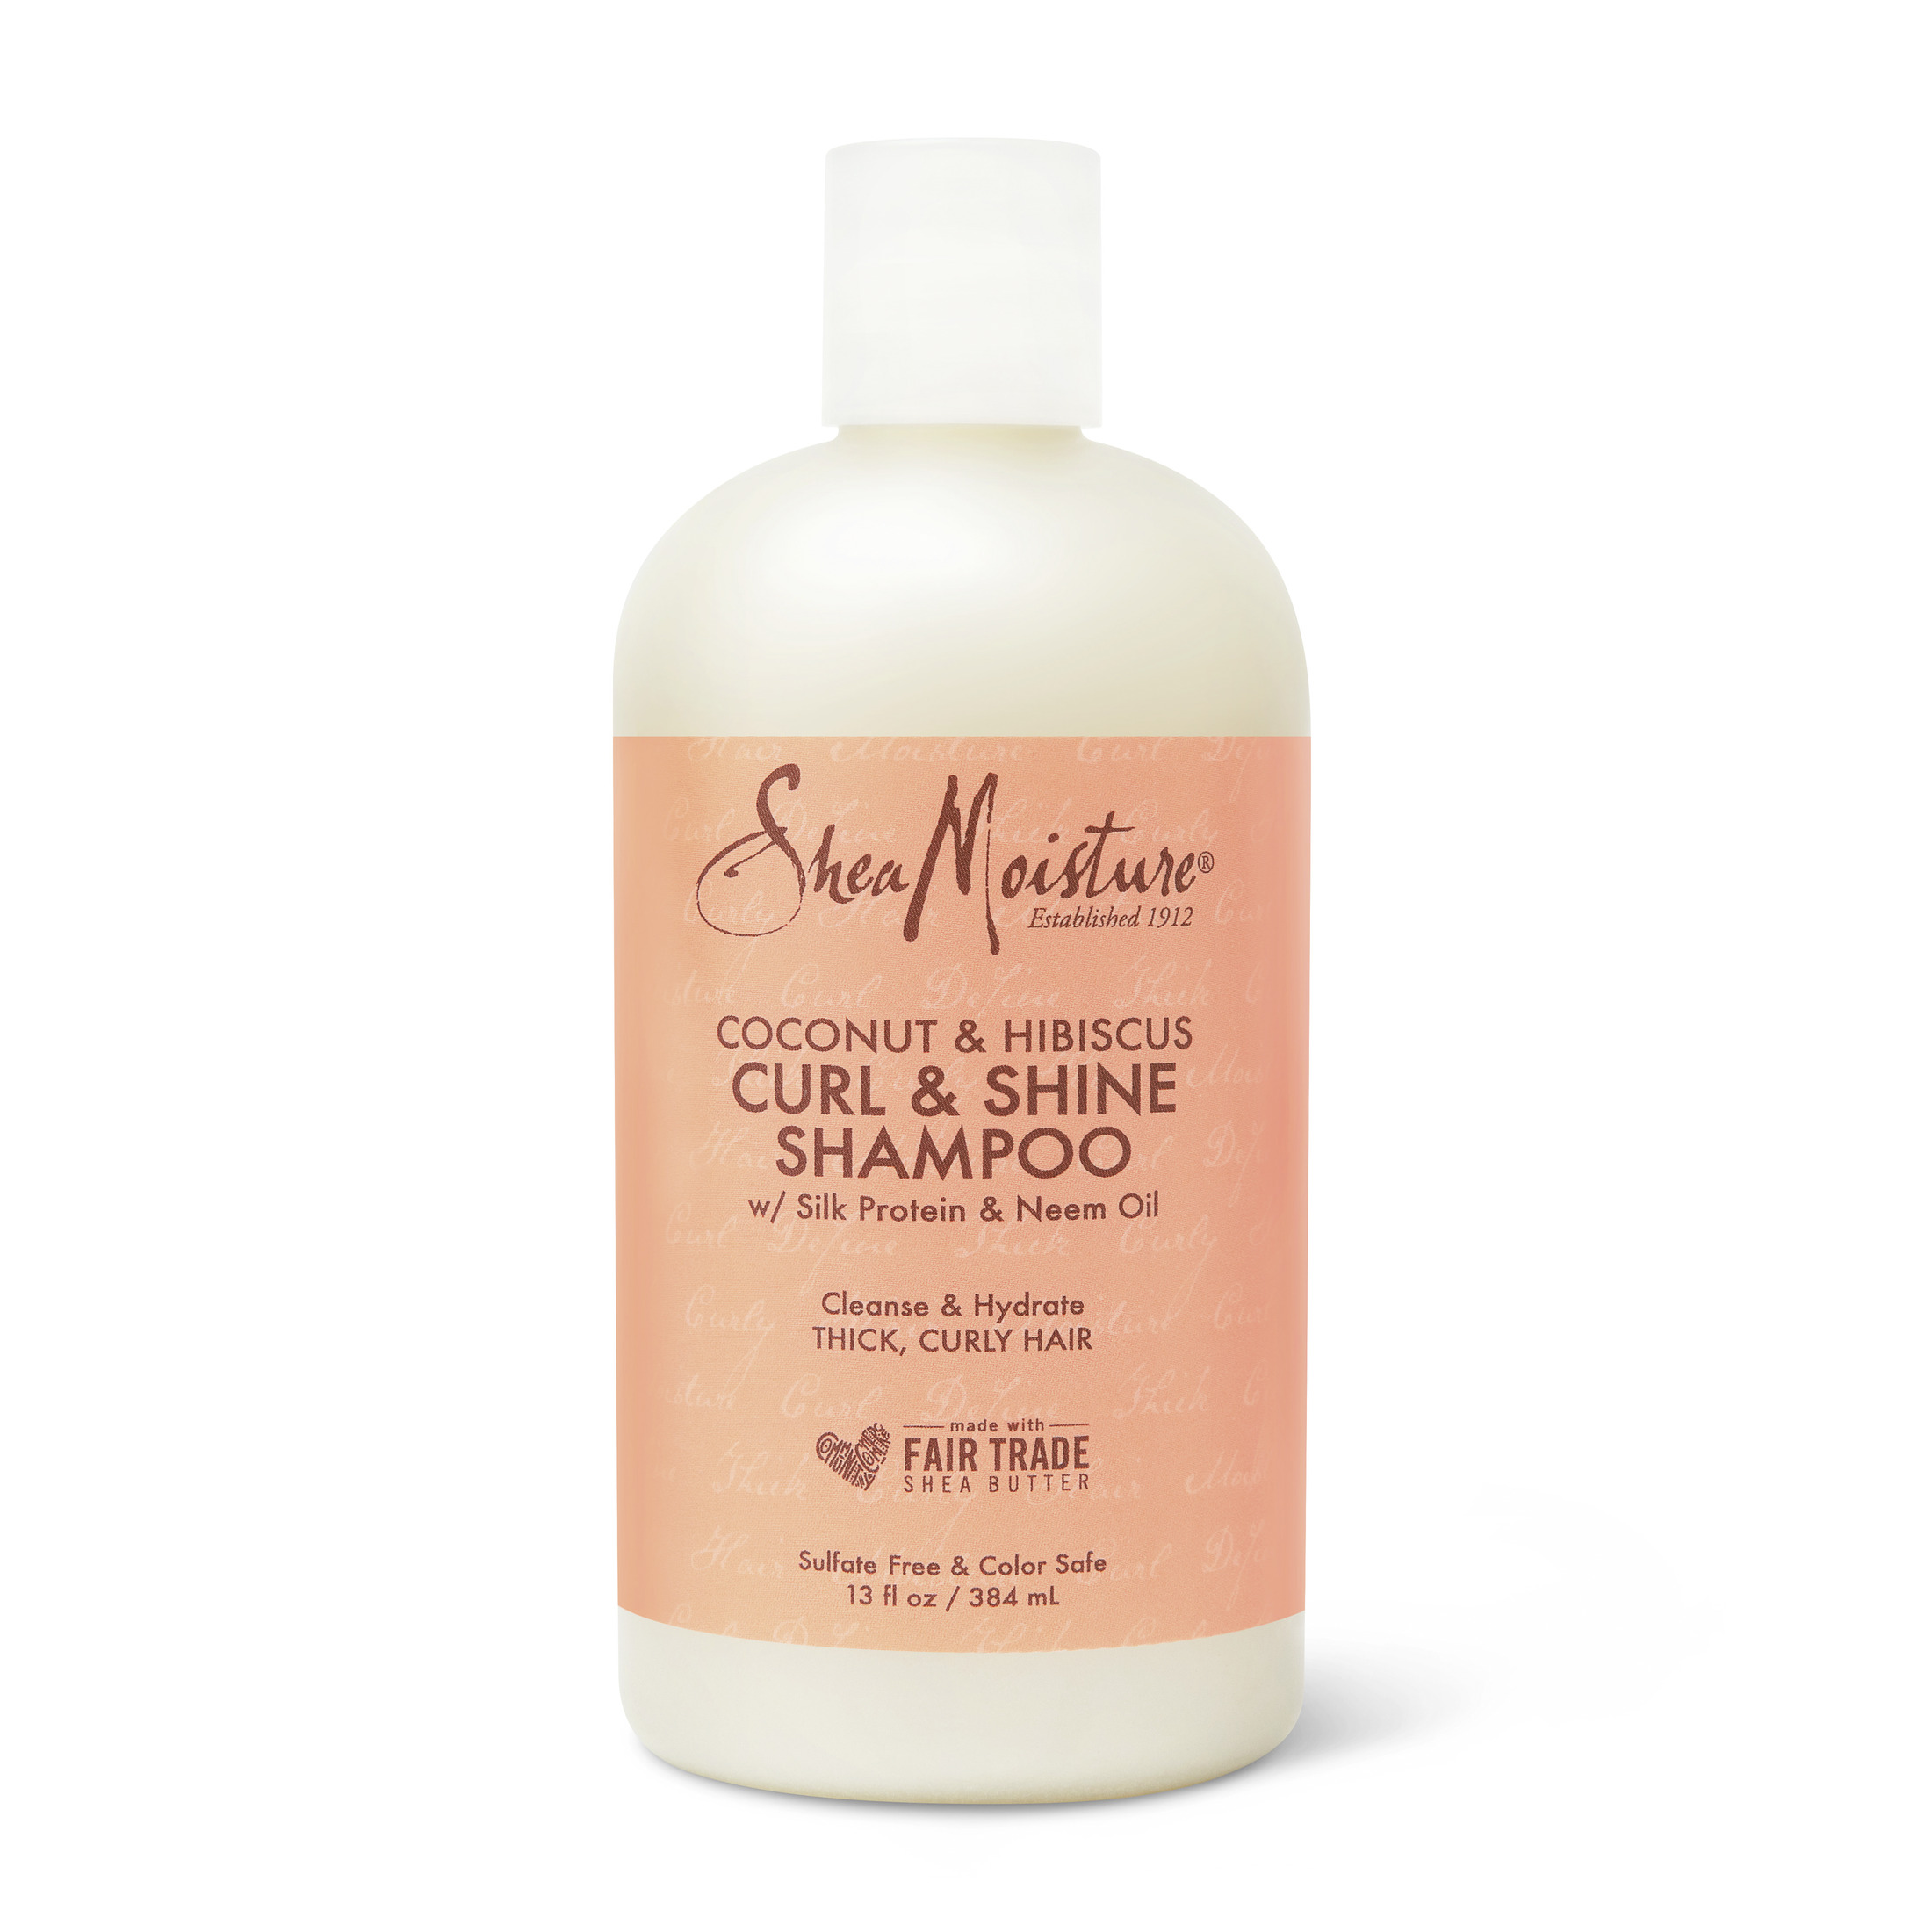 SheaMoisture Curl and Shine Daily Shampoo, Coconut and Hibiscus, 13 fl oz - image 1 of 14